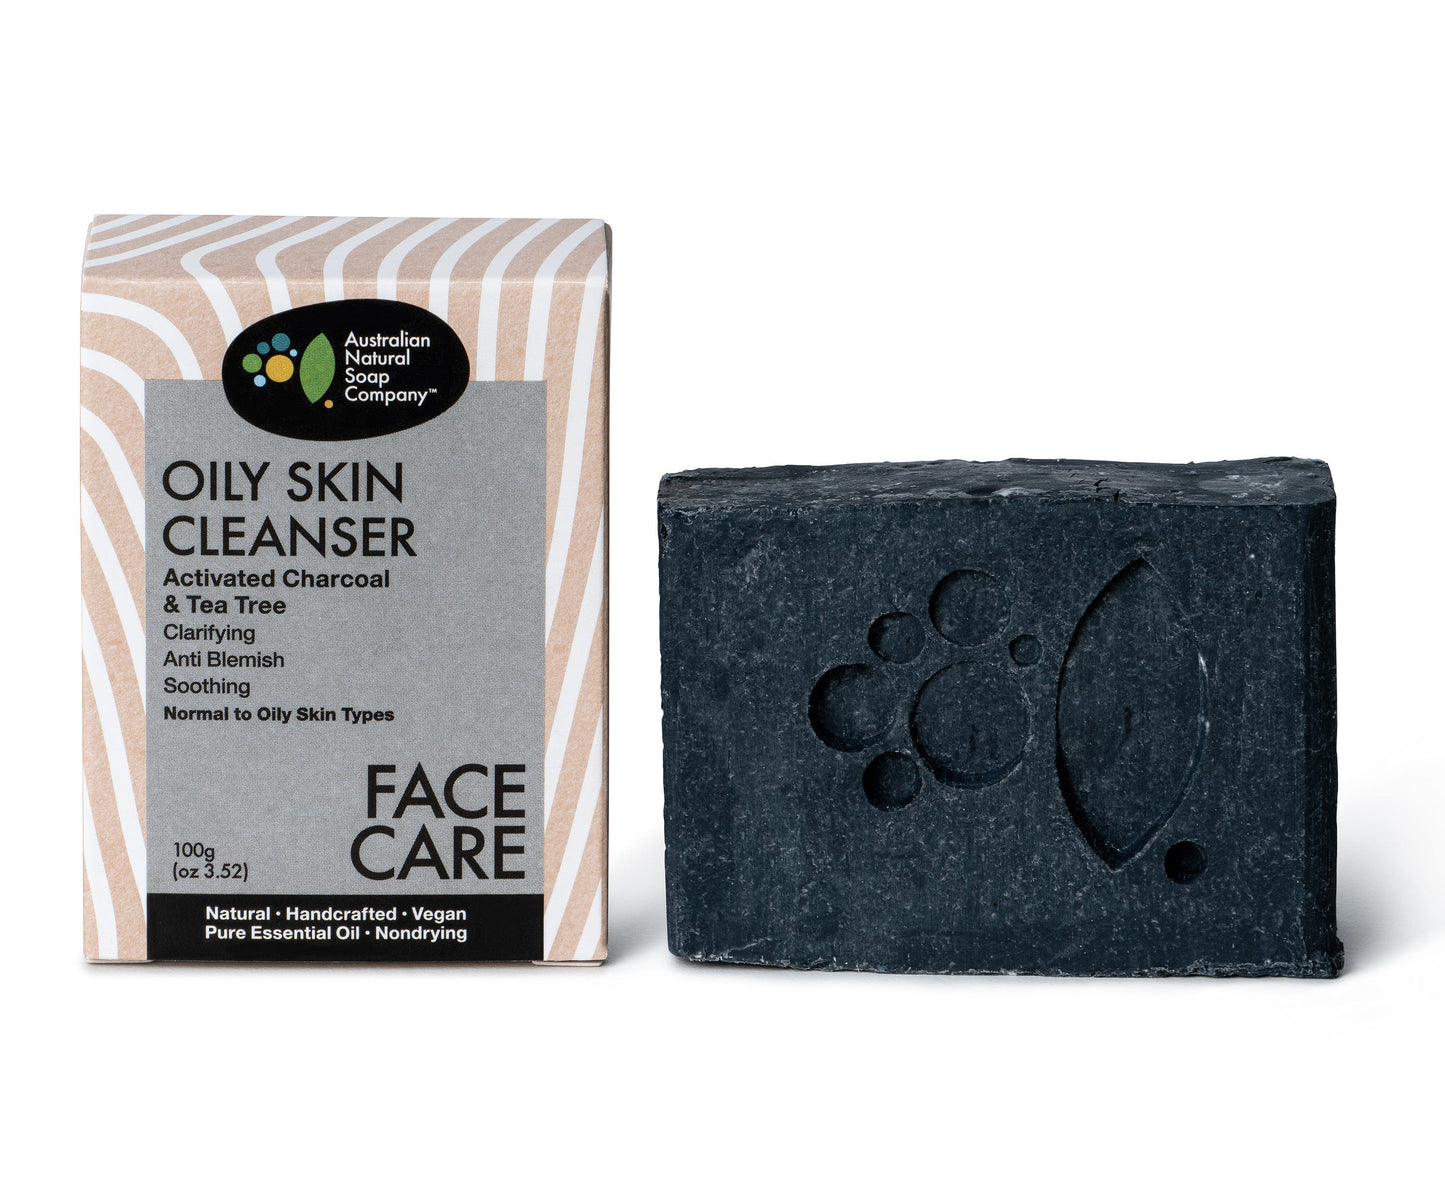 The Australian Natural Soap Company - Oily Skin Facial Cleanser 100g